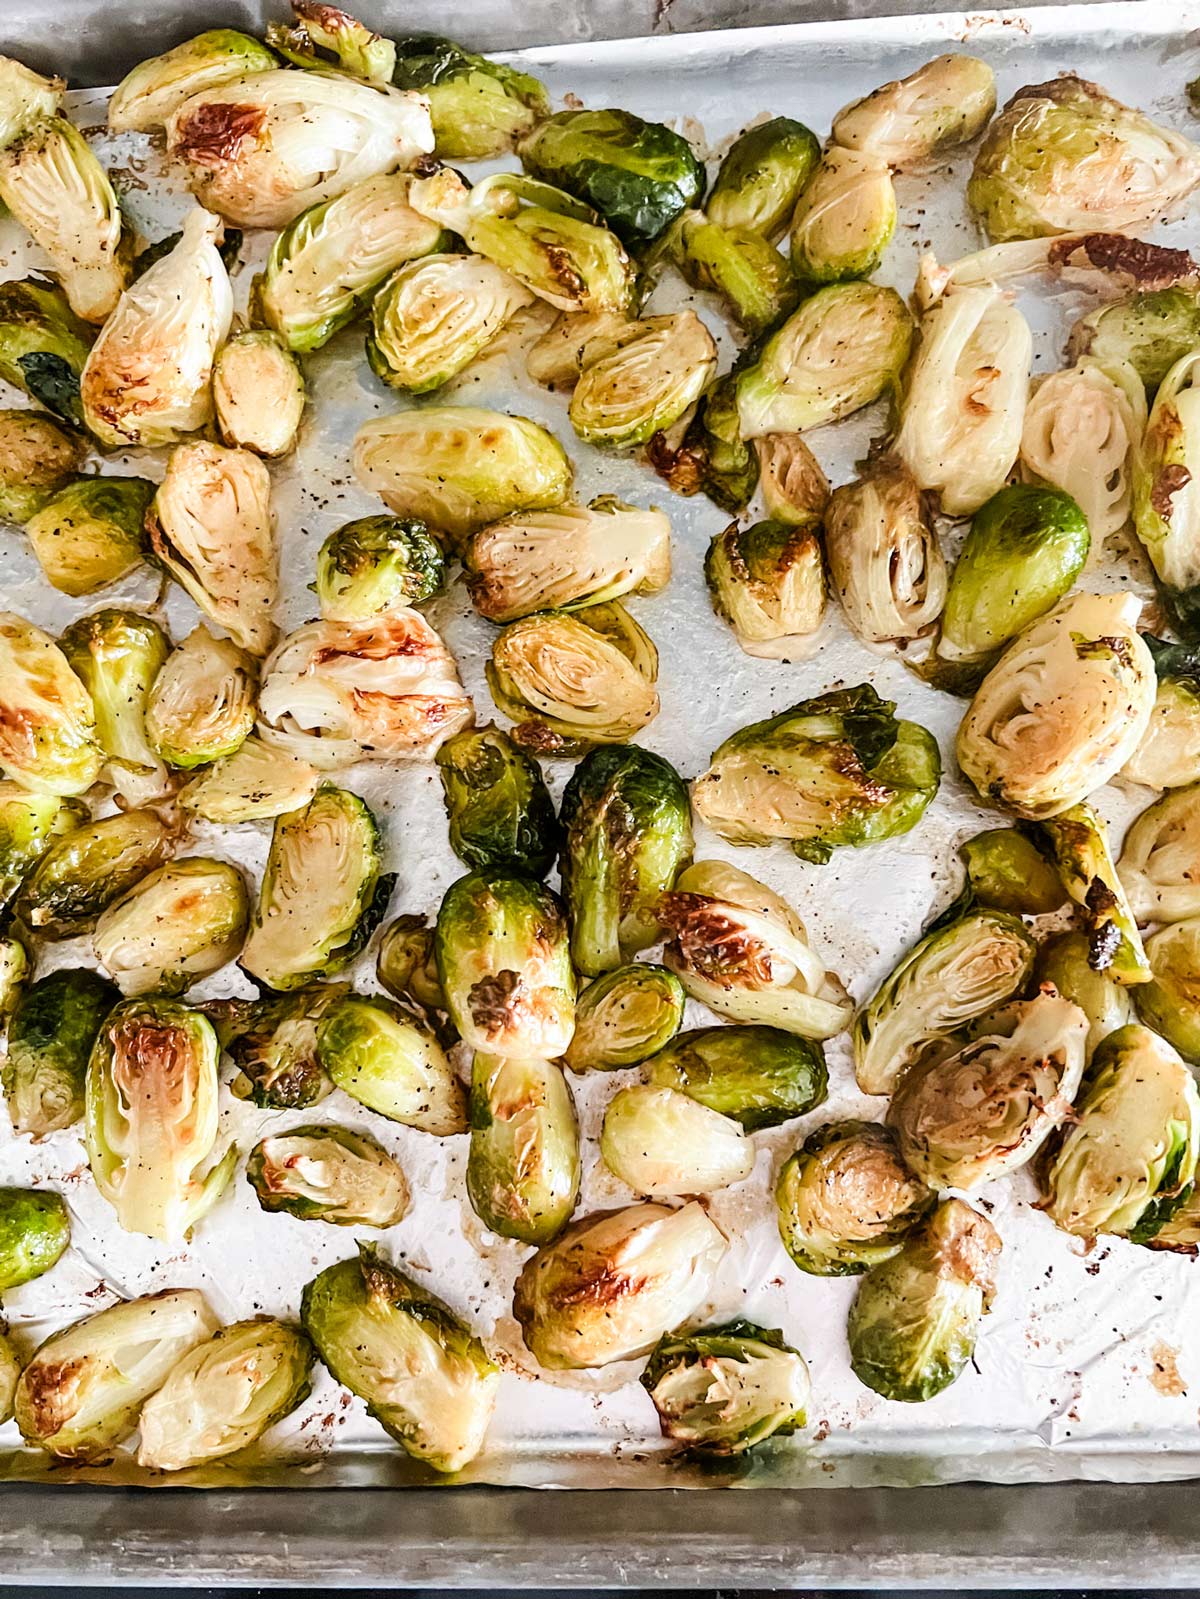 Roasted Brussels sprouts on a foil lined baking sheet.